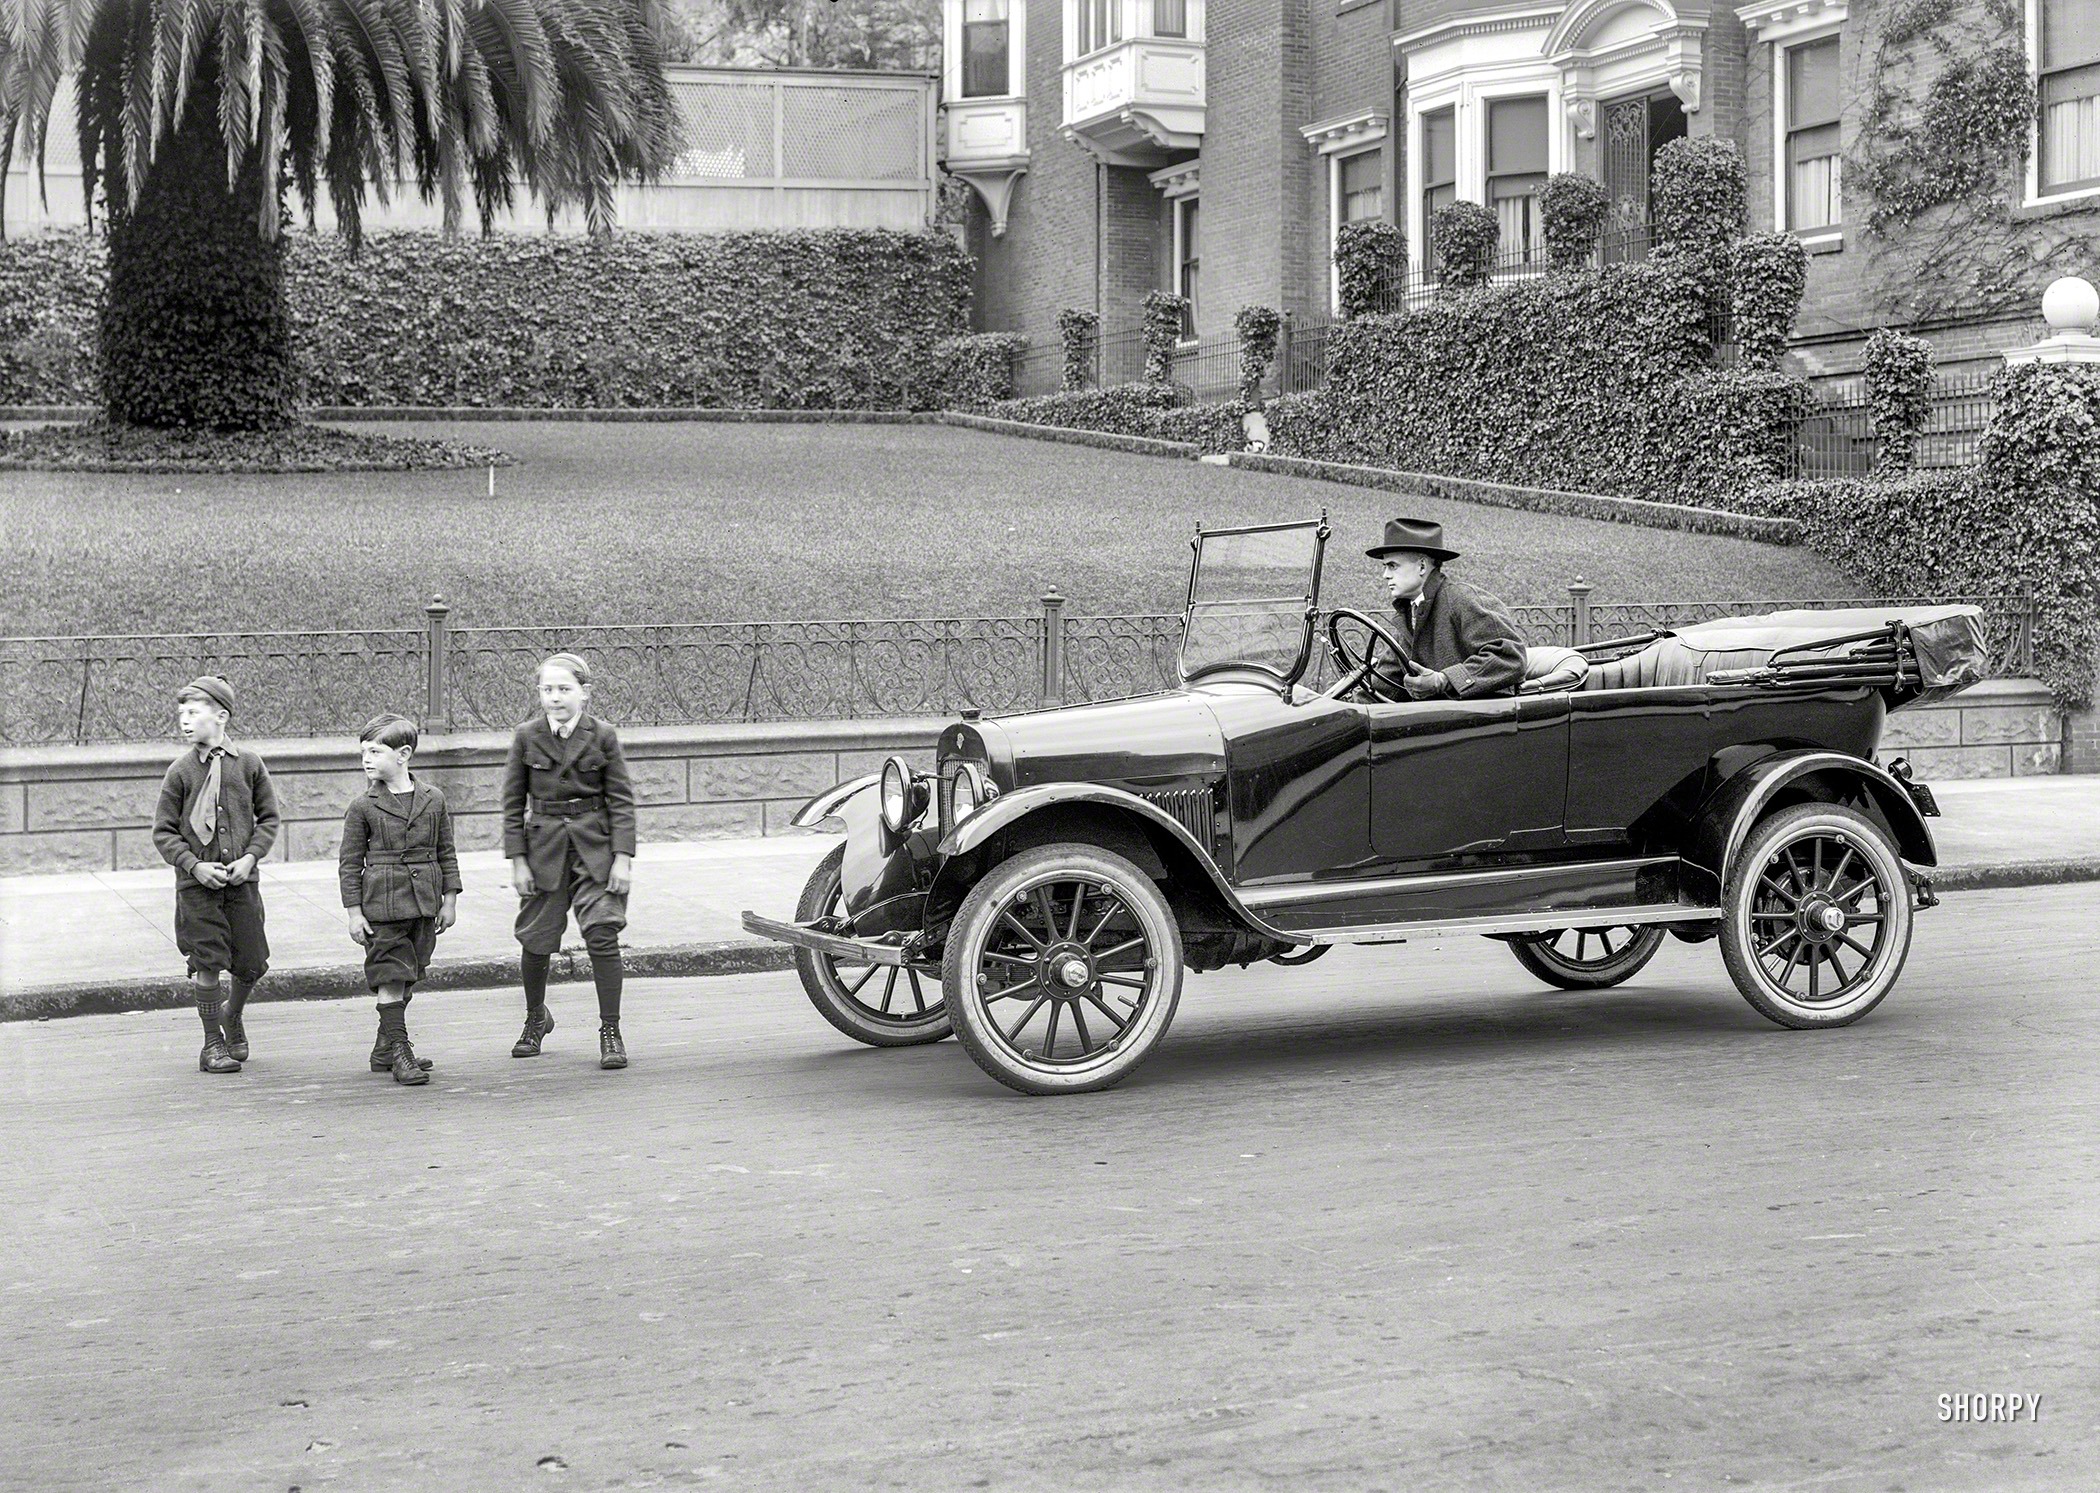 No caption survives for this view of a circa 1920 Maxwell, but we would guess it had something to do with the car's excellent brakes, or maybe its triple-strength spring-steel bumper. 5x7 glass negative by Christopher Helin. View full size.